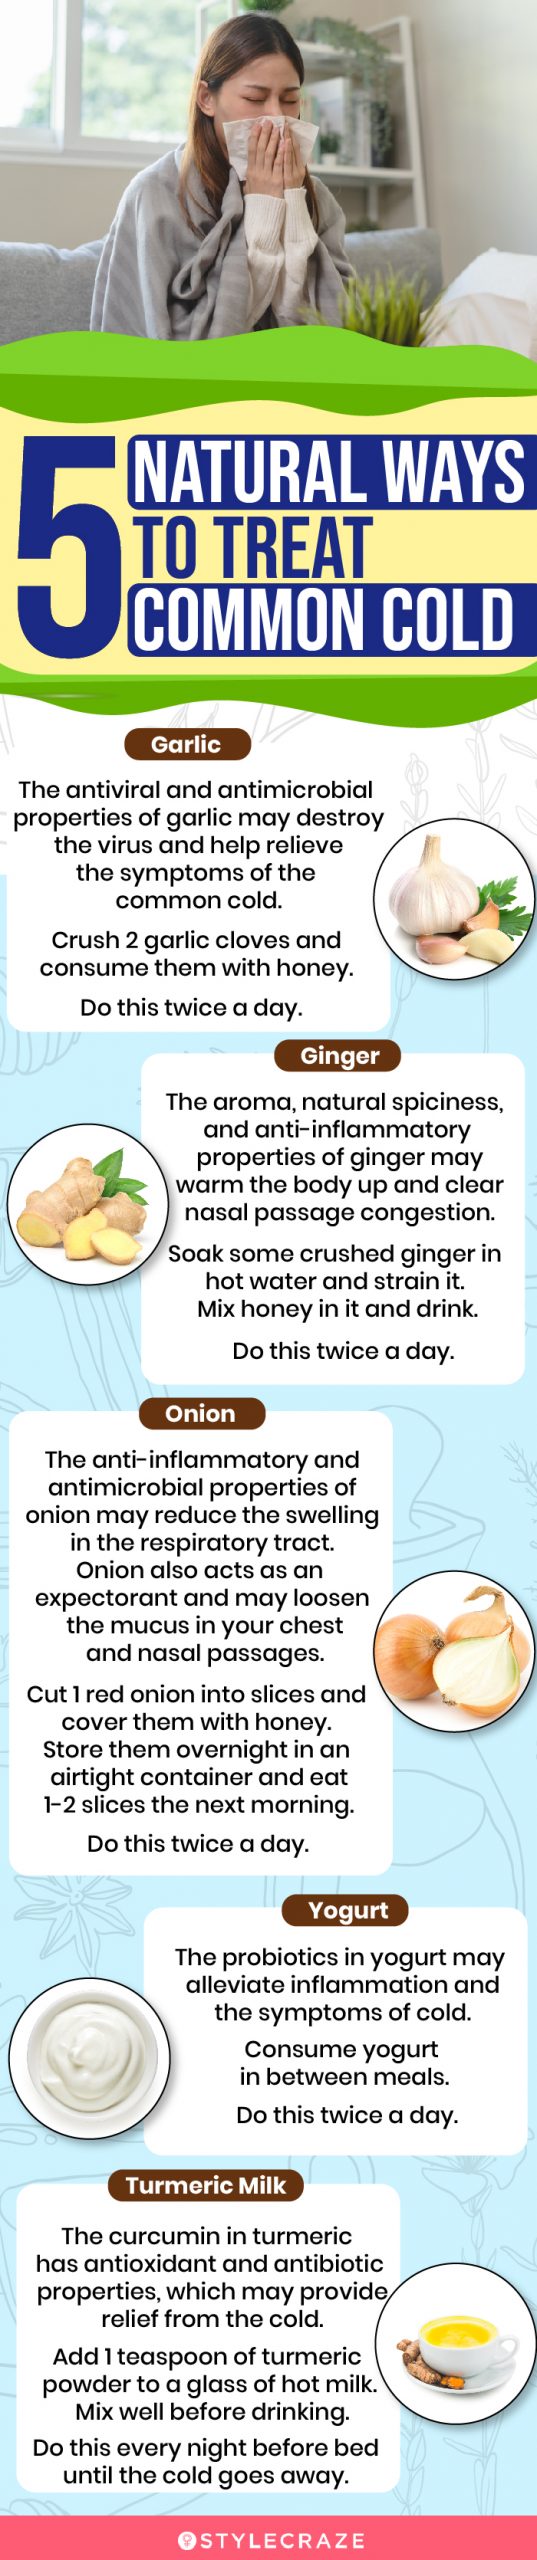 5 natural ways to treat common cold (infographic)